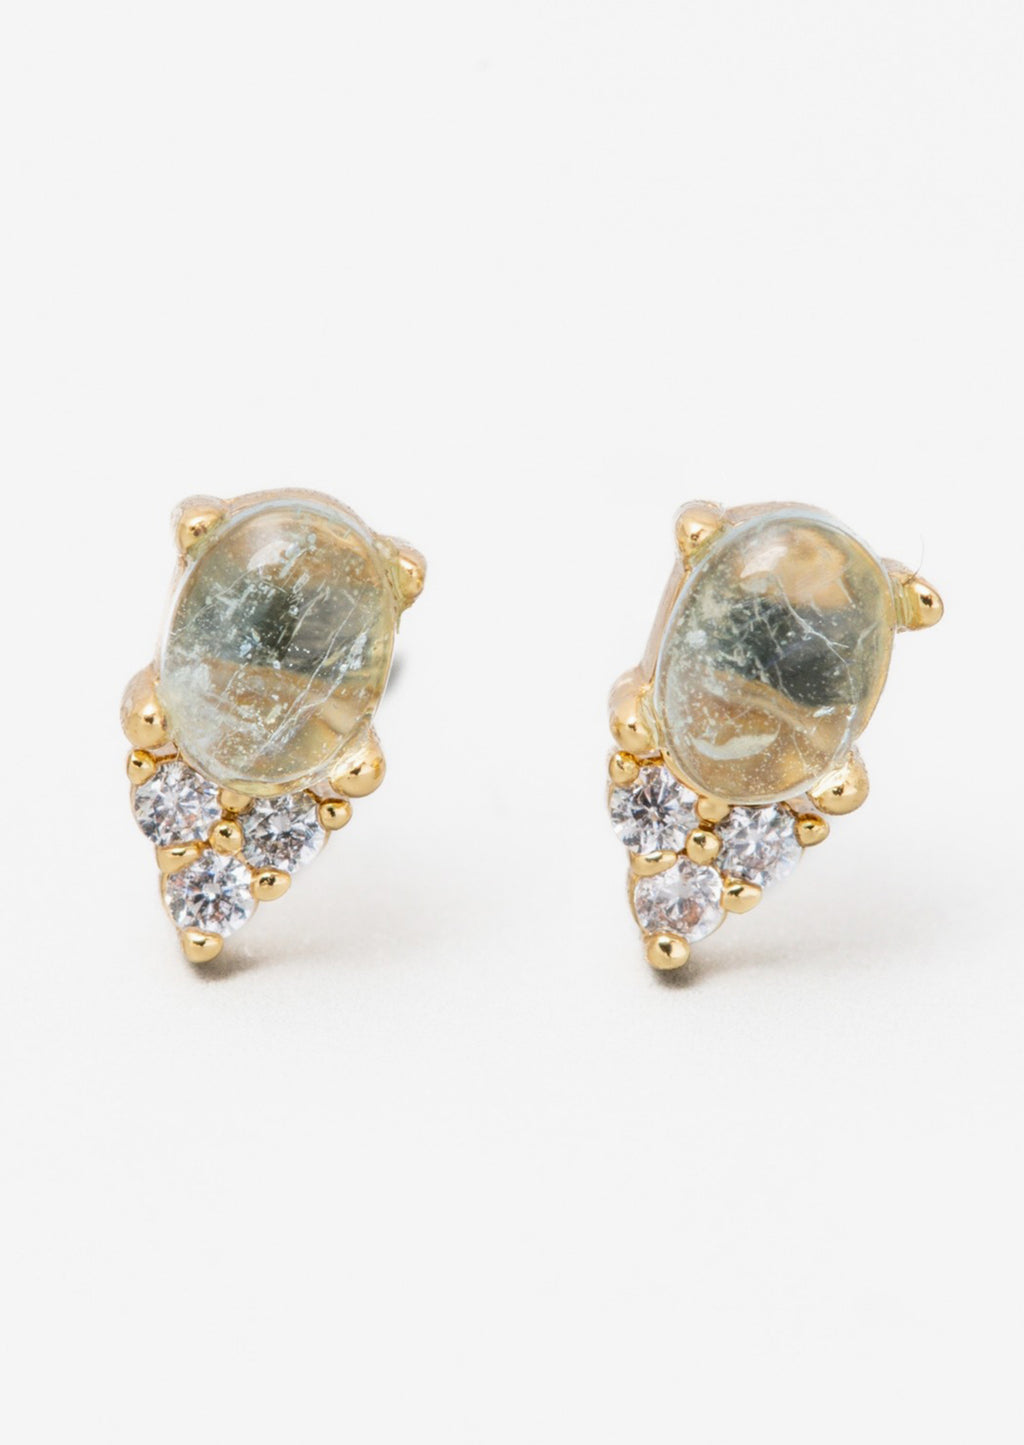 Small: A pair of small aquamarine stud earrings in gold with crystal detail.